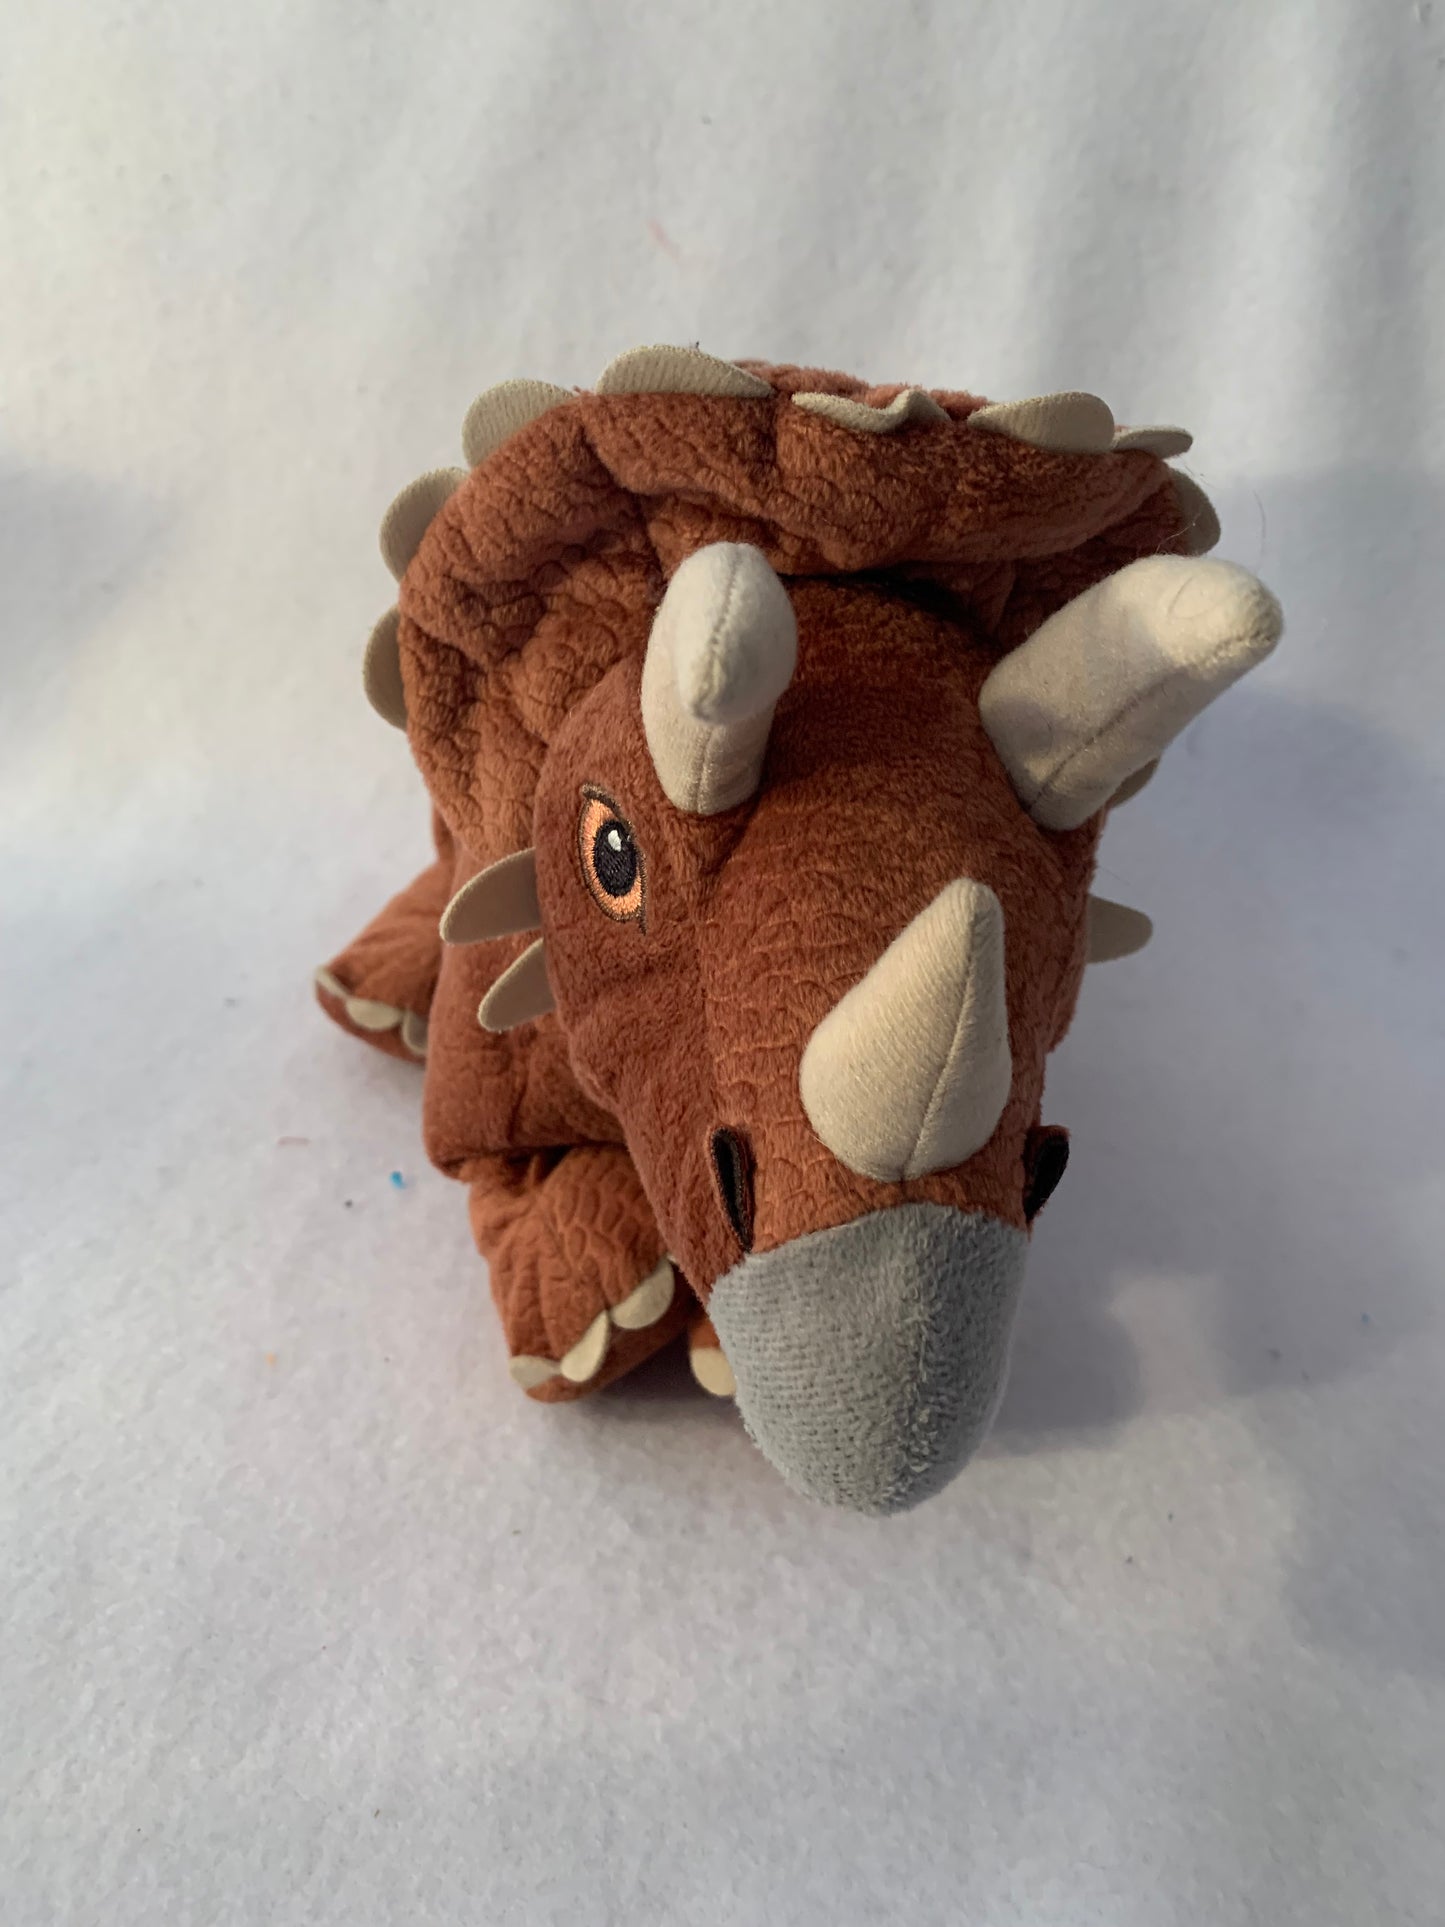 Weighted stuffed animal - Tyrannosaurus Rex with 2-4 lbs, washable weighted buddy, triceratops, dinosaur, dino